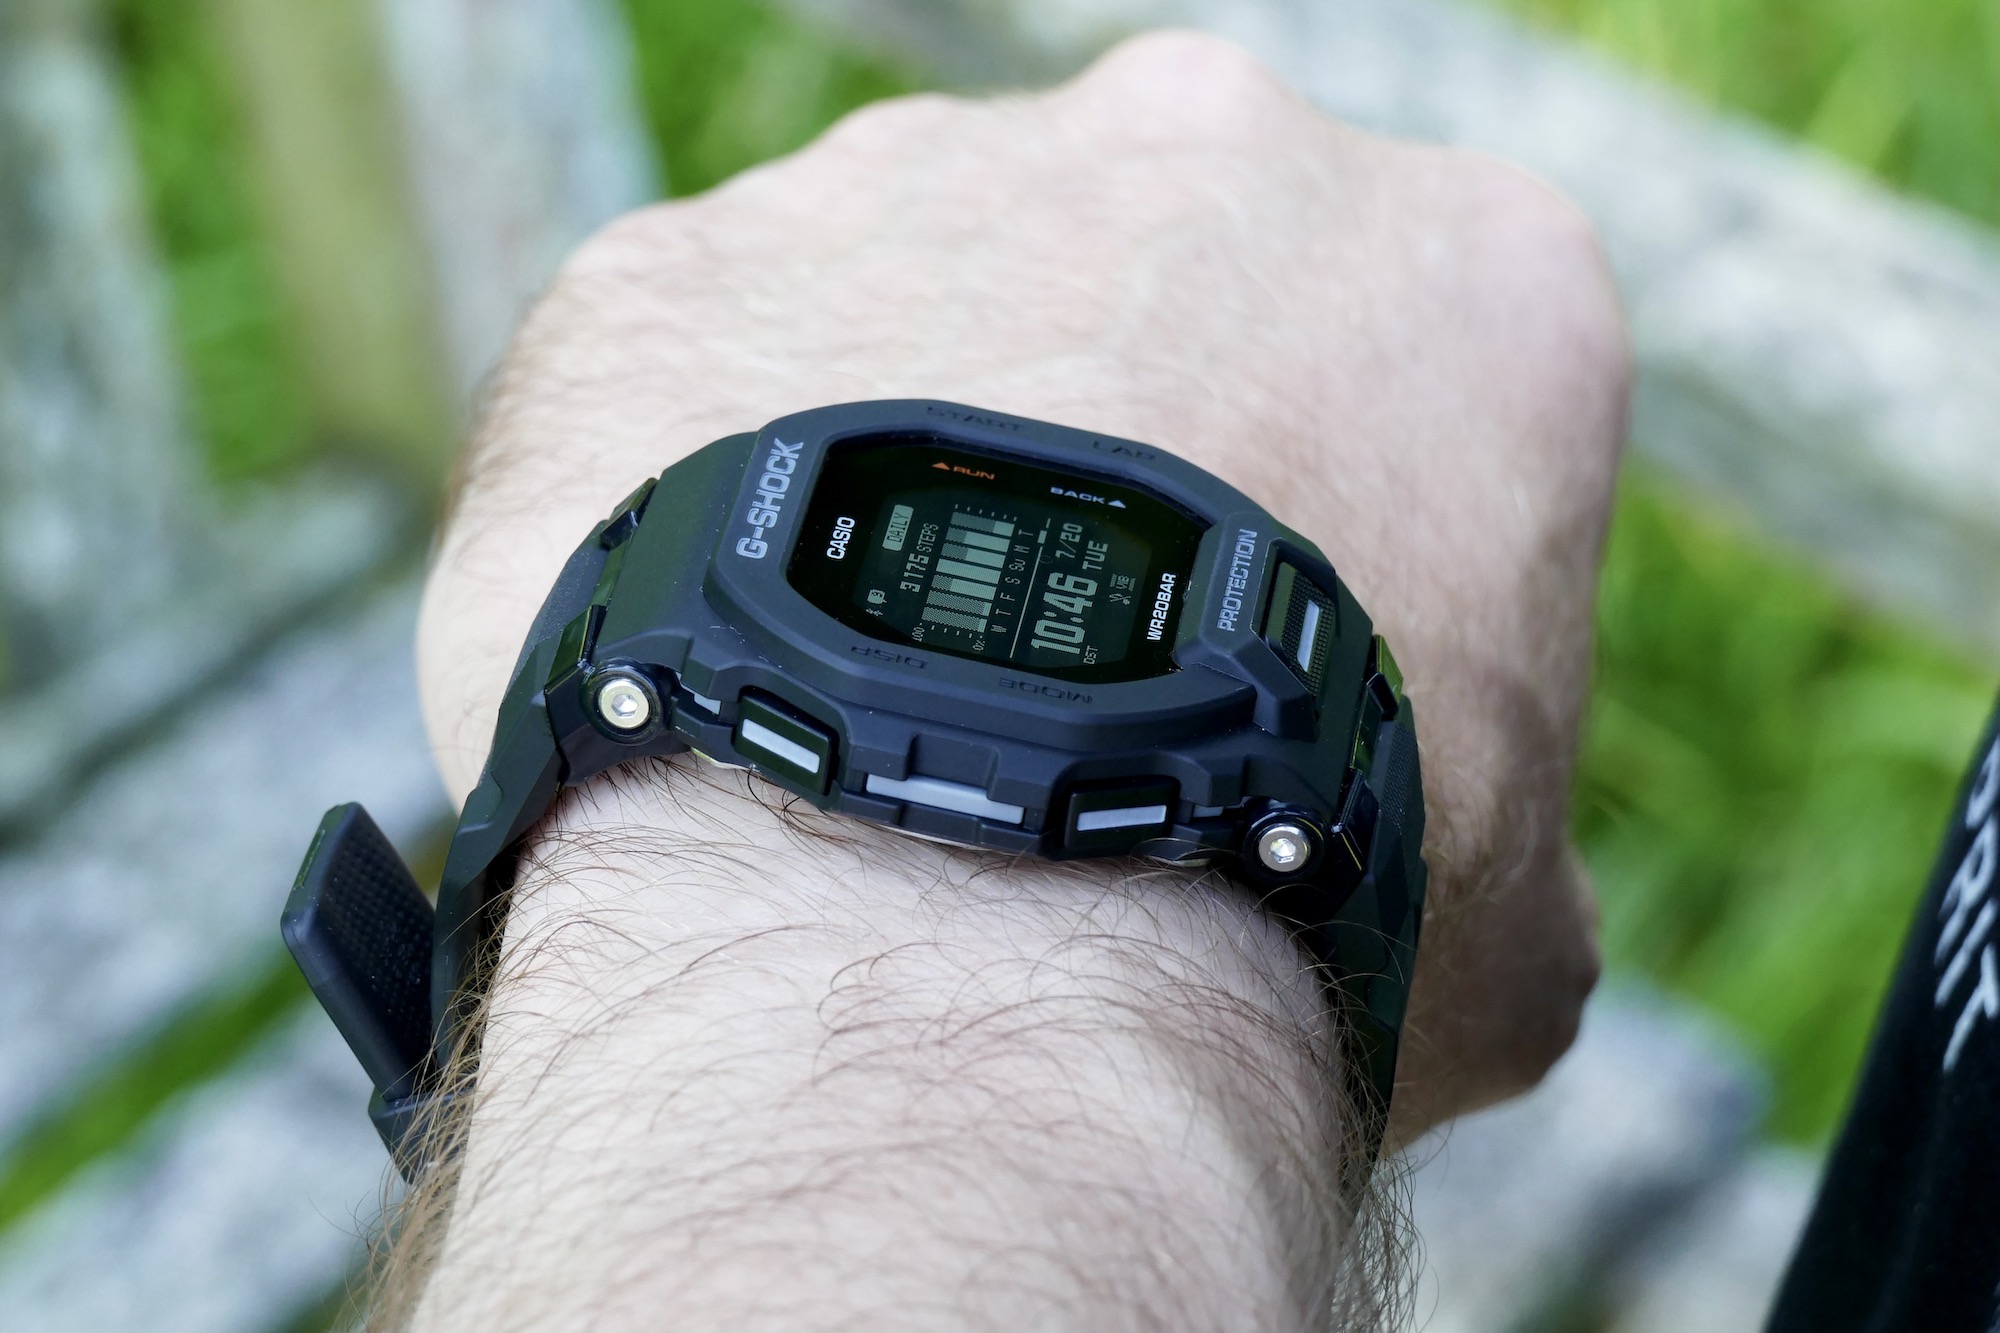 Digital GBD-200 | Trends Balanced Perfectly Casio G-Shock Review: